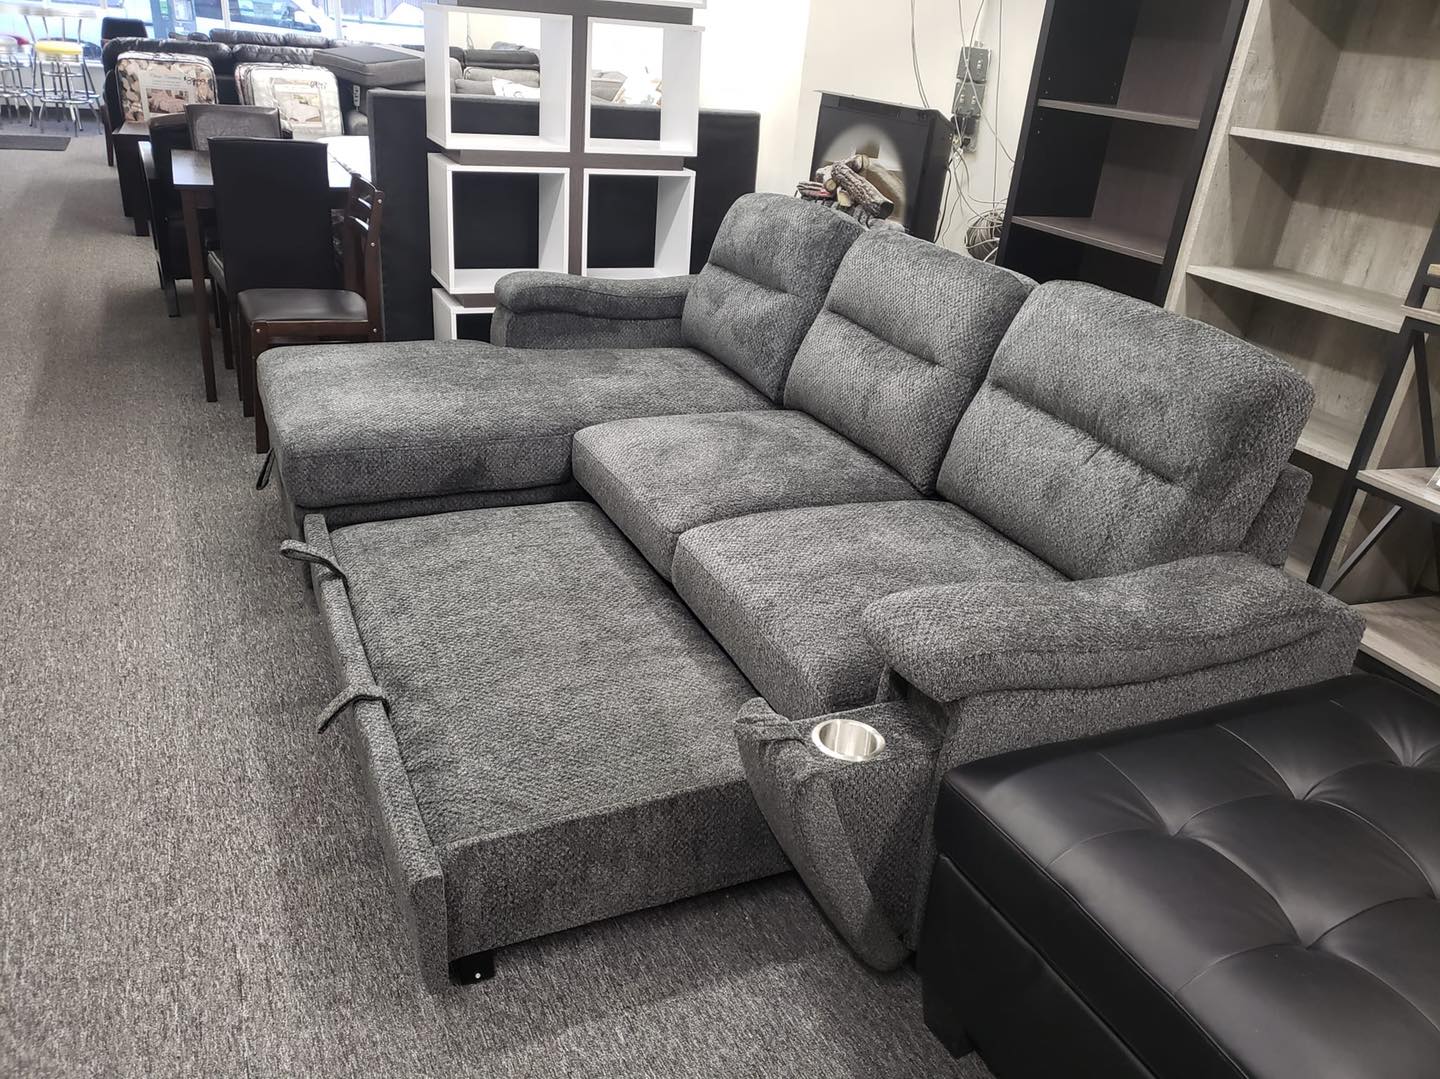 Barstow - Sofa Pull Out Bed with 2 Hidden Cupholders and Reversible Storage Chaise in Charcoal